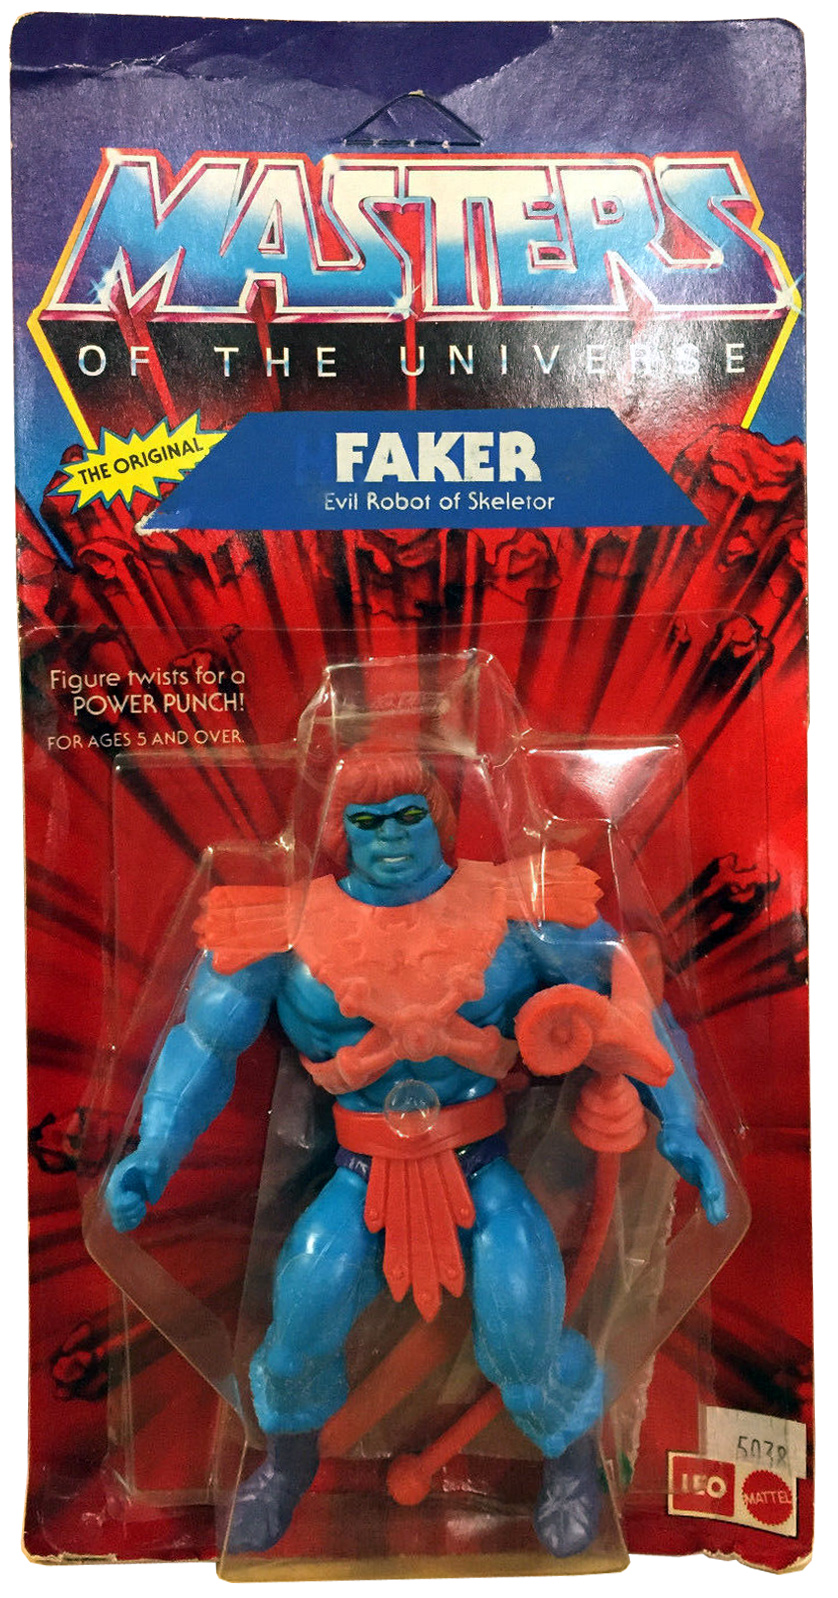 Valuable 80s and 90s Toys - Fake Action Figure